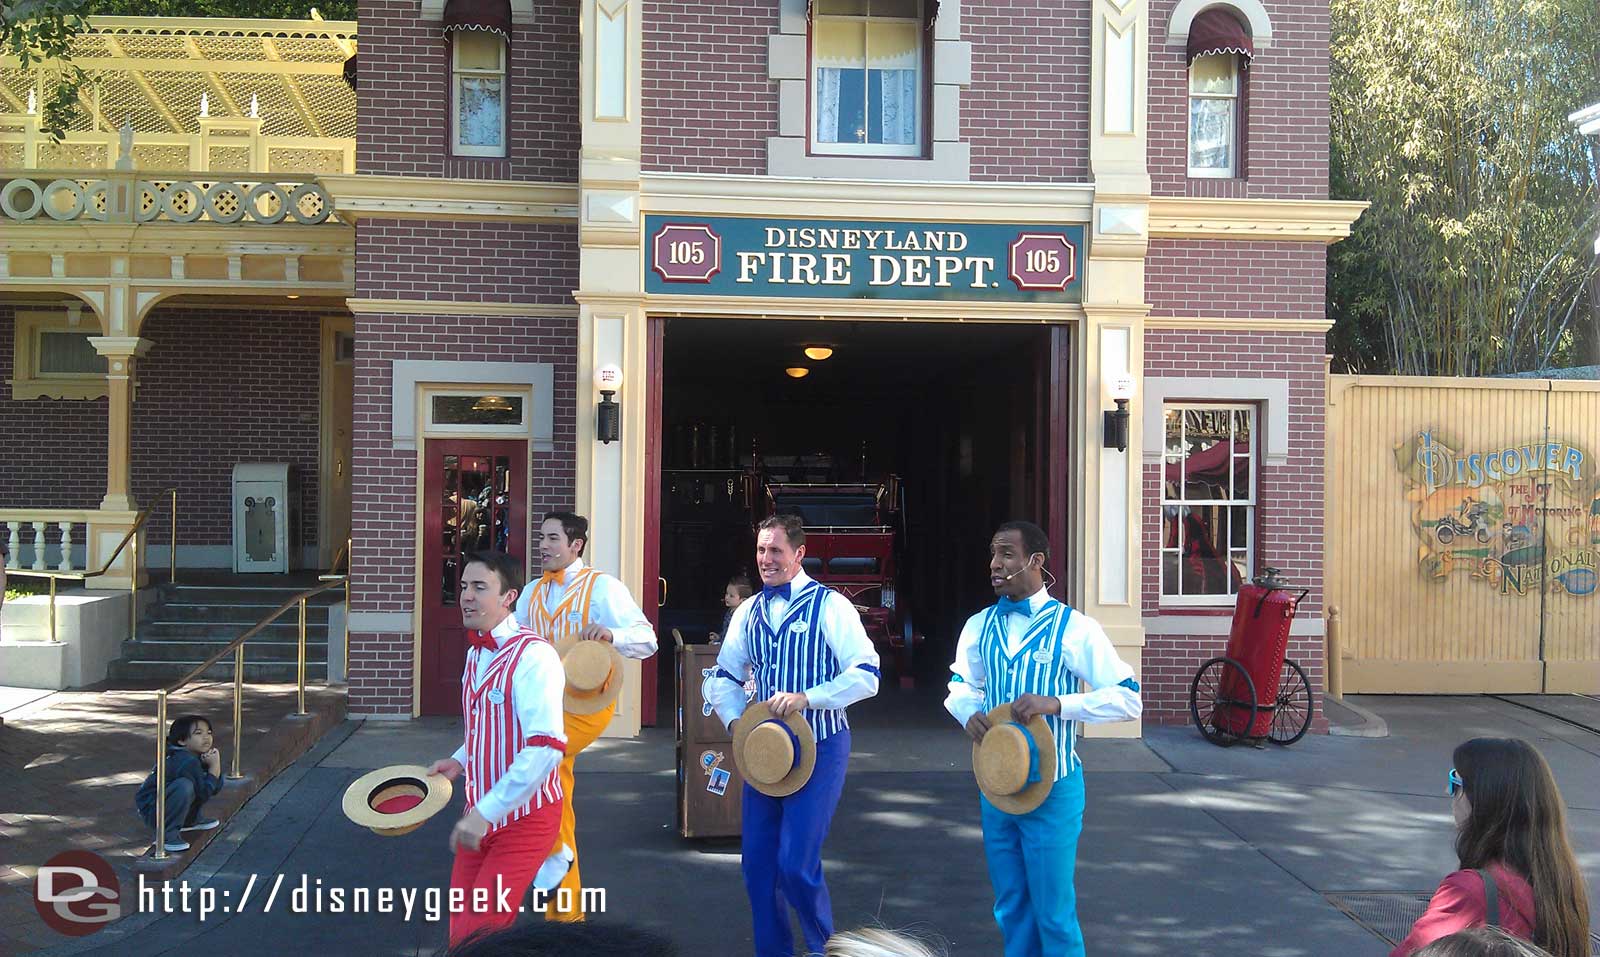 Starting off my afternoon with the Dapper Dans of Disneyland today.